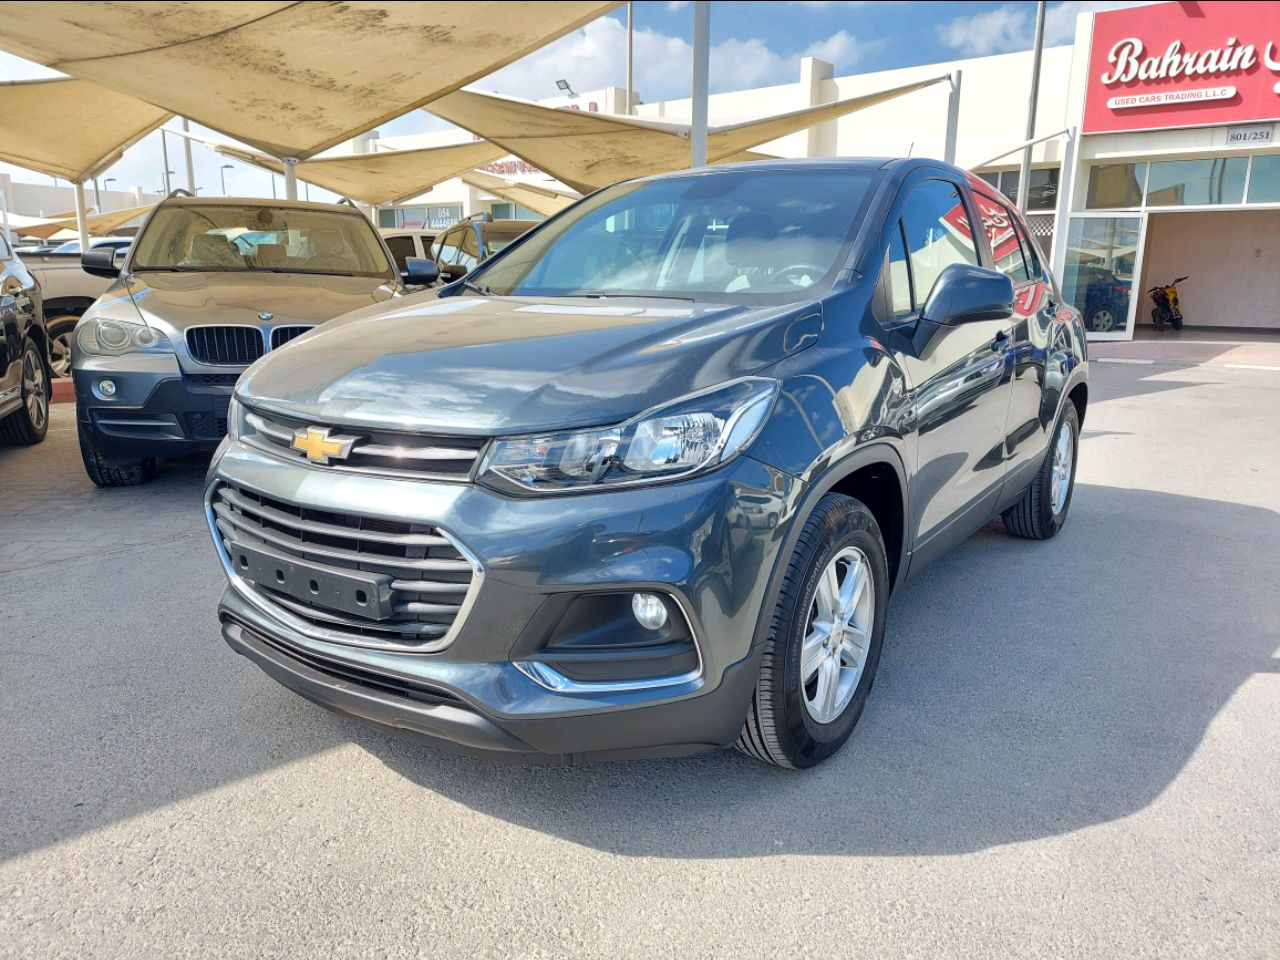 Chevrolet TRAX 2018 AED 38,000, Good condition, Warranty, Lady Use, Navigation System, Fog Lights, Negotiable, Full Service Report